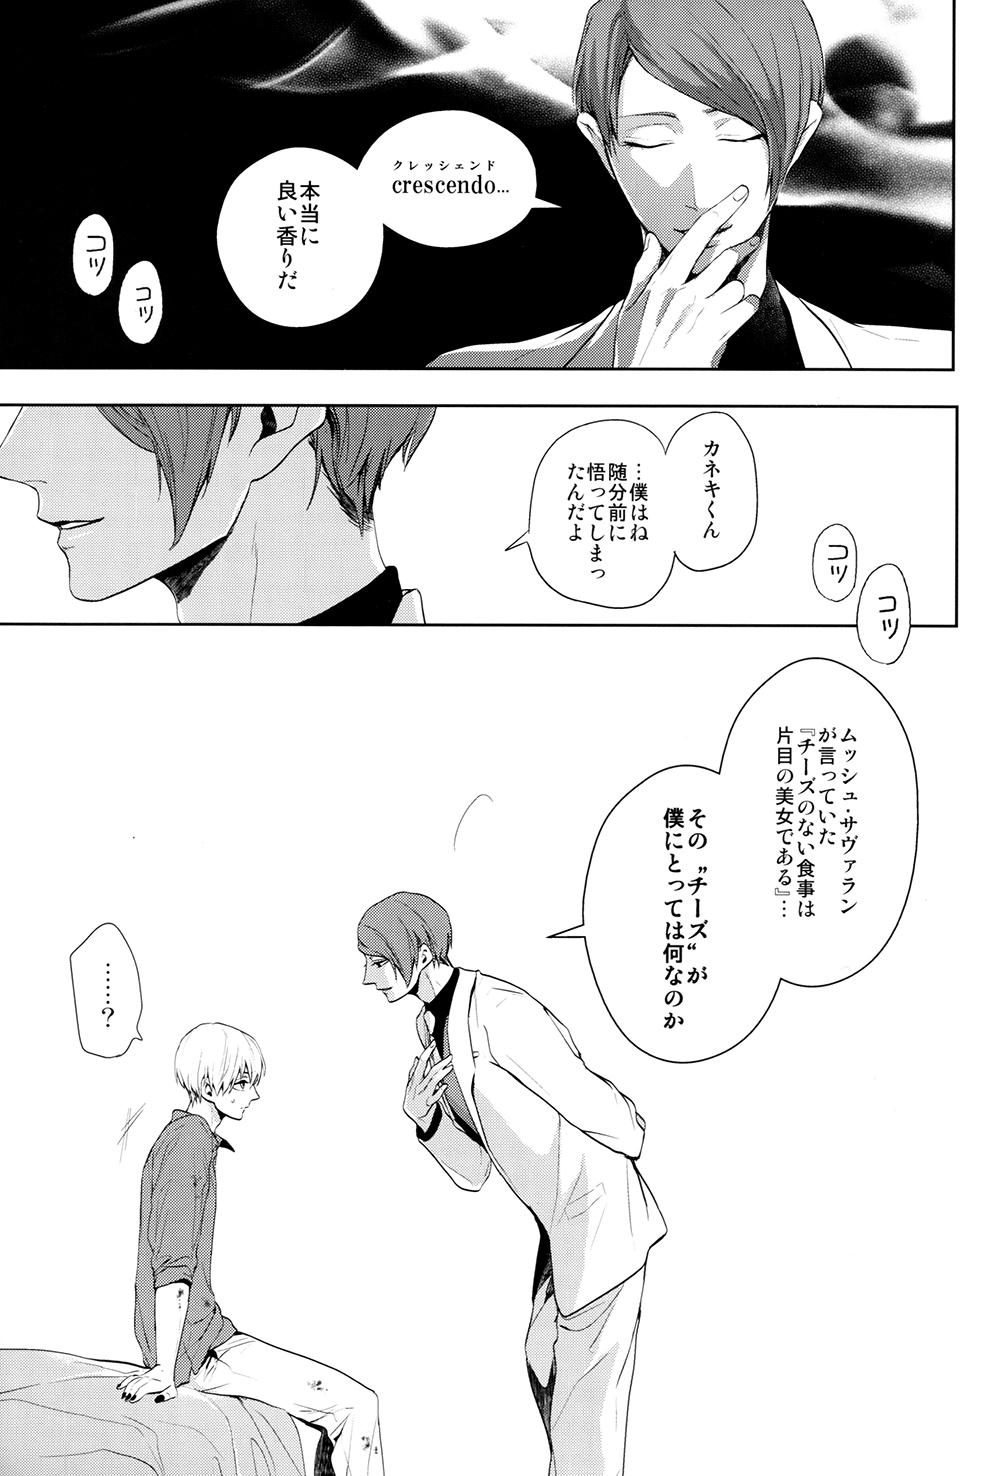 Eurobabe Go⇔Joe - Tokyo ghoul Hoe - Page 4